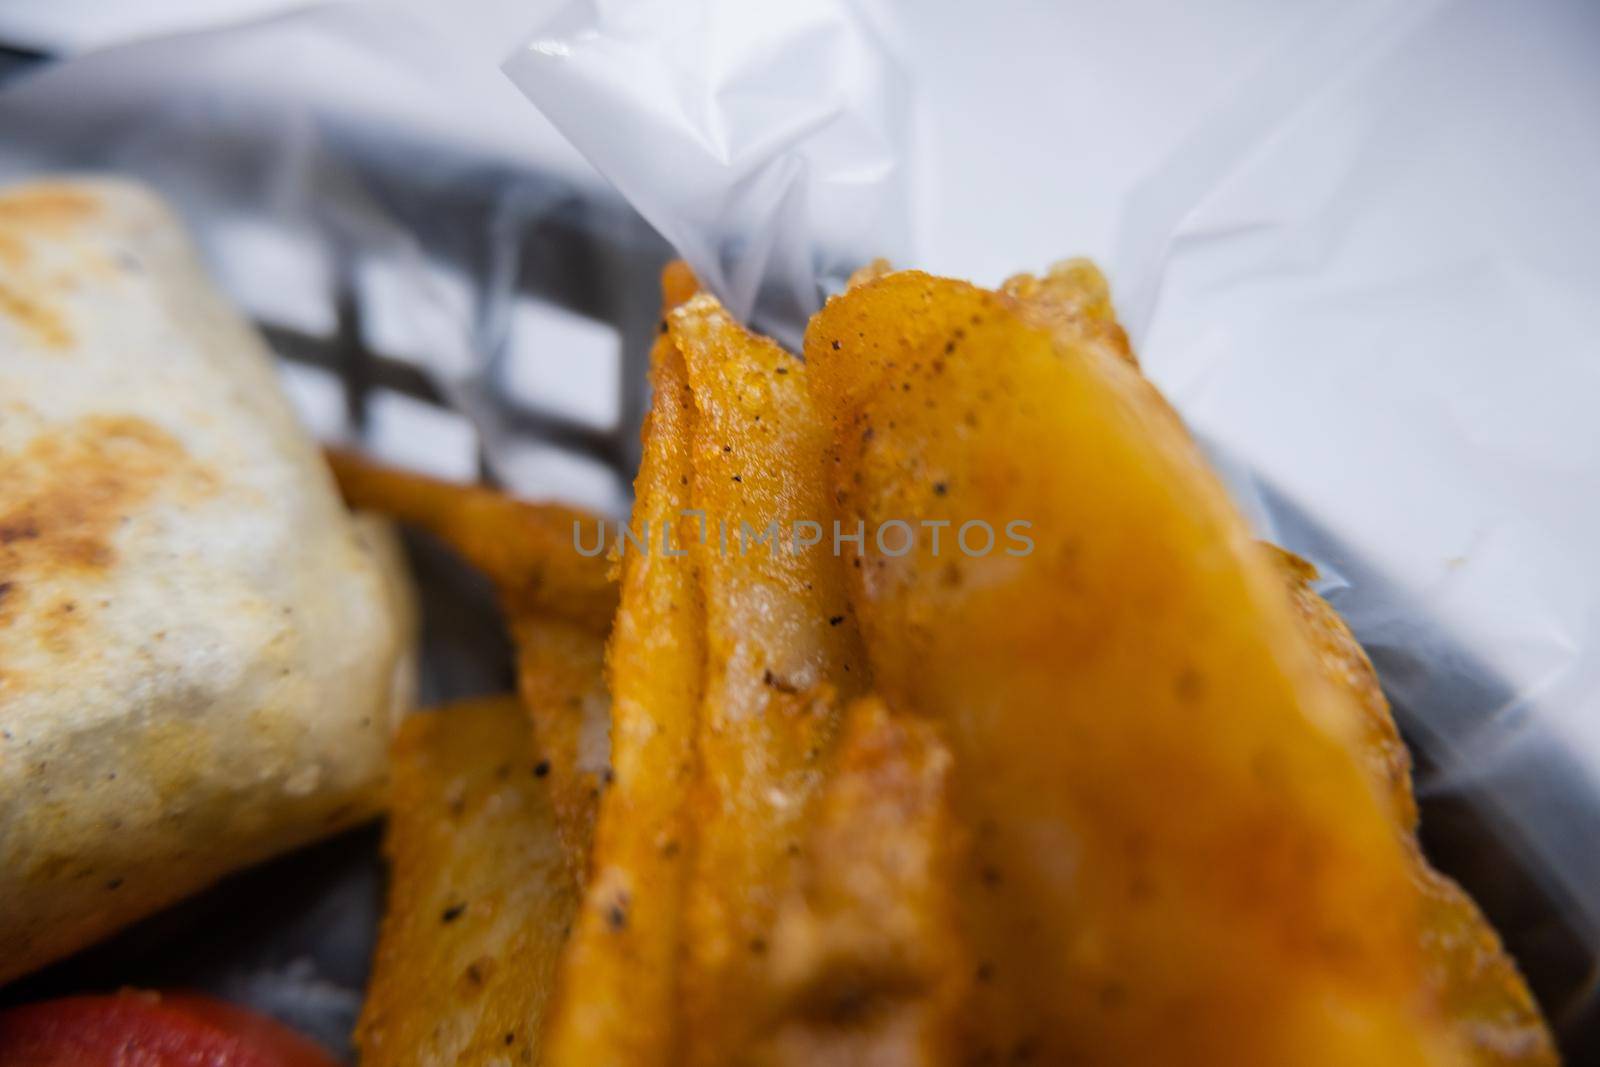 Extreme close-up of potato wedges and two spicy pork burritos in black plastic basket. Mexican-style pork burritos and vegetables in plastic container. Mexican fast food